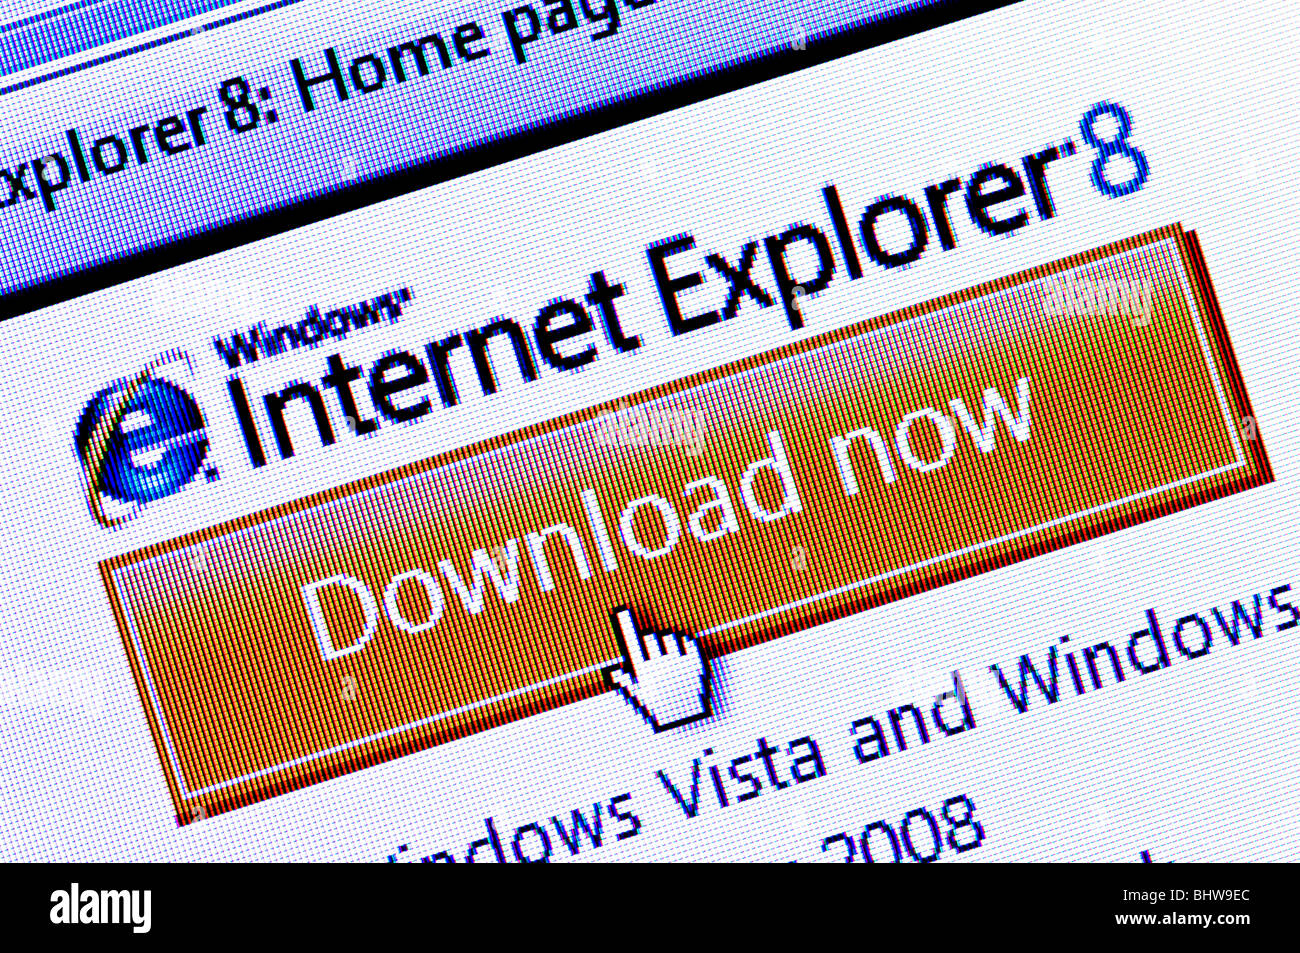 Macro screenshot of the Internet Explorer 8 download icon / option bar on the Microsoft website. Editorial use only. Stock Photo